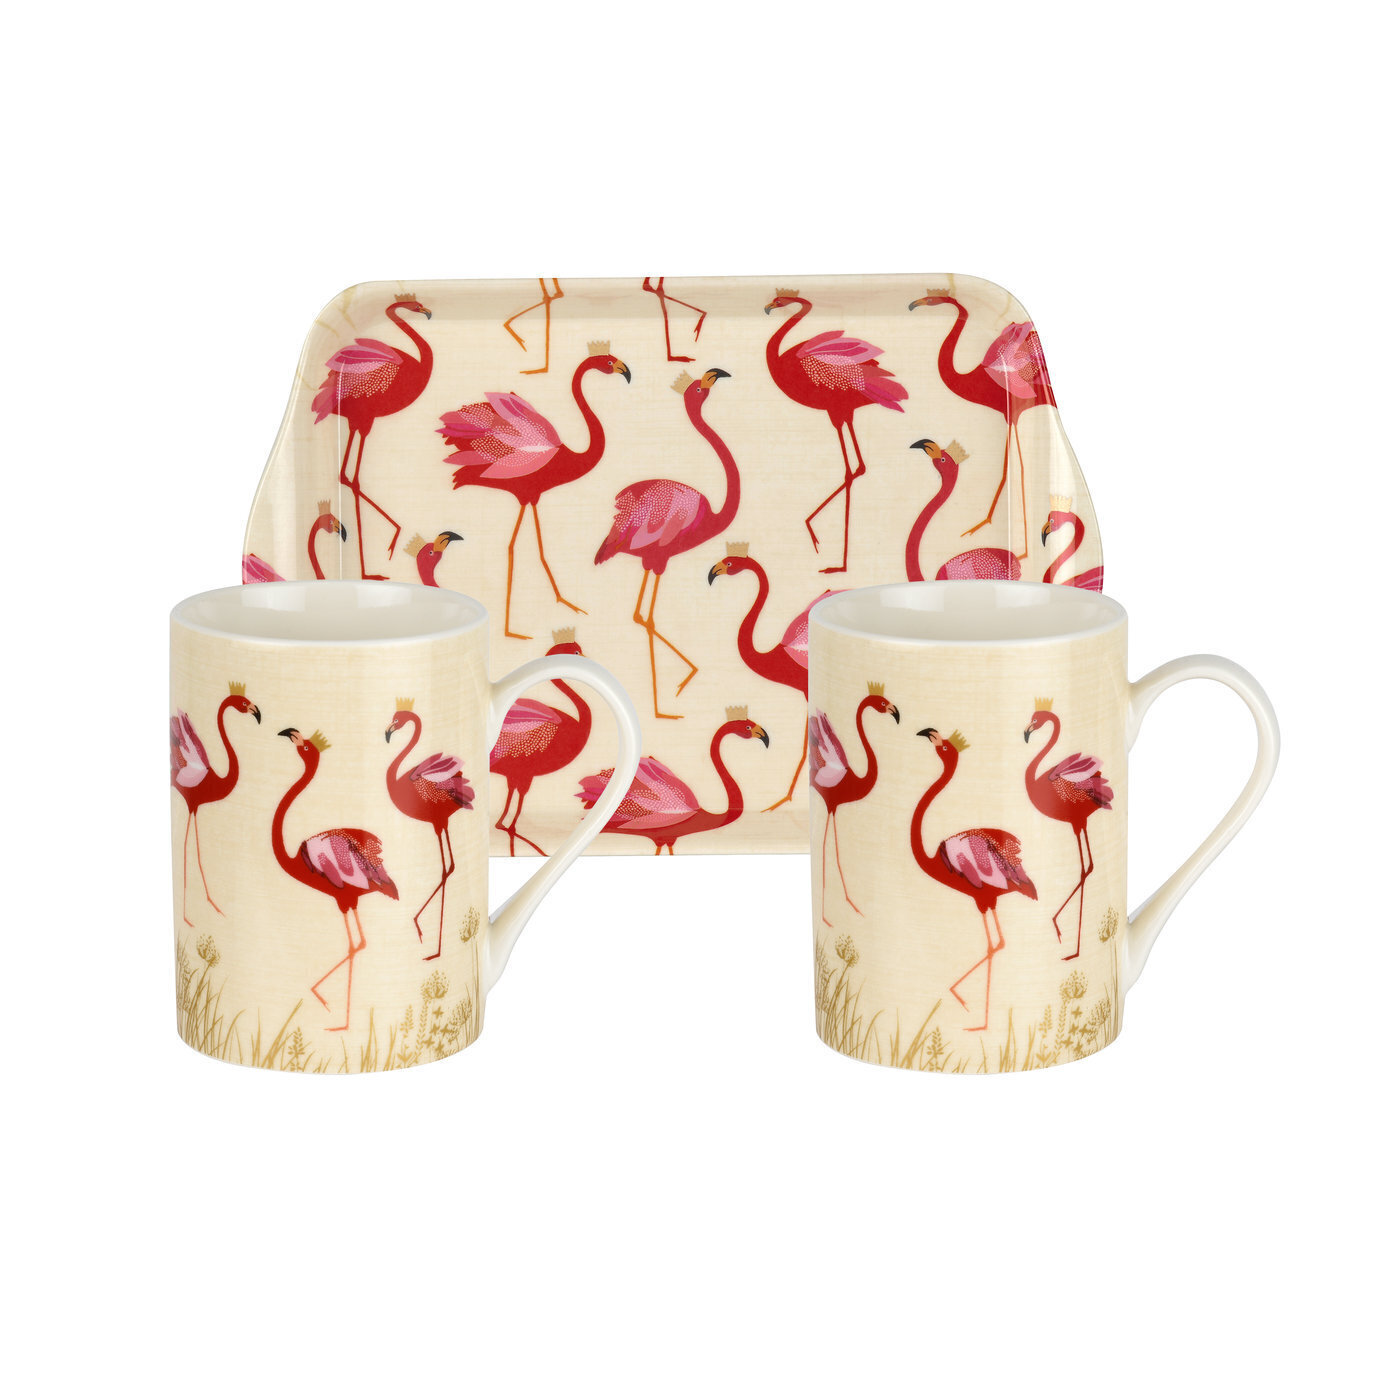 Pimpernel The Flamingo Collection Set of 2 Mugs and Tray